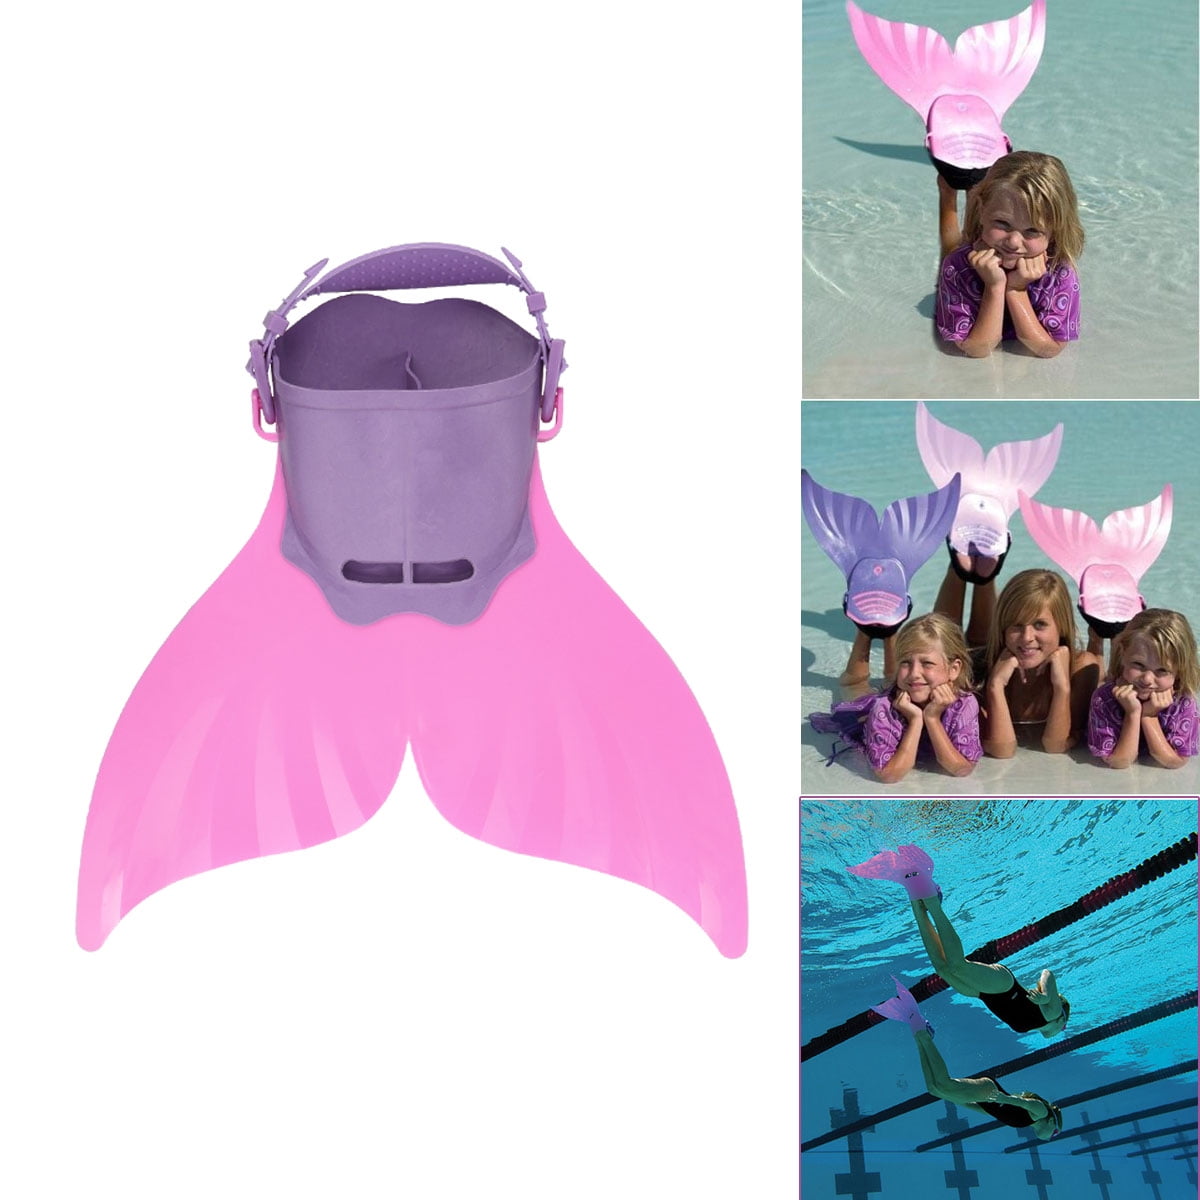 lemondress Monofin Adjustable Mermaid tails Swim Fins with 3 Color for Swimming with Flipper Diving Fins-Girls,Boys